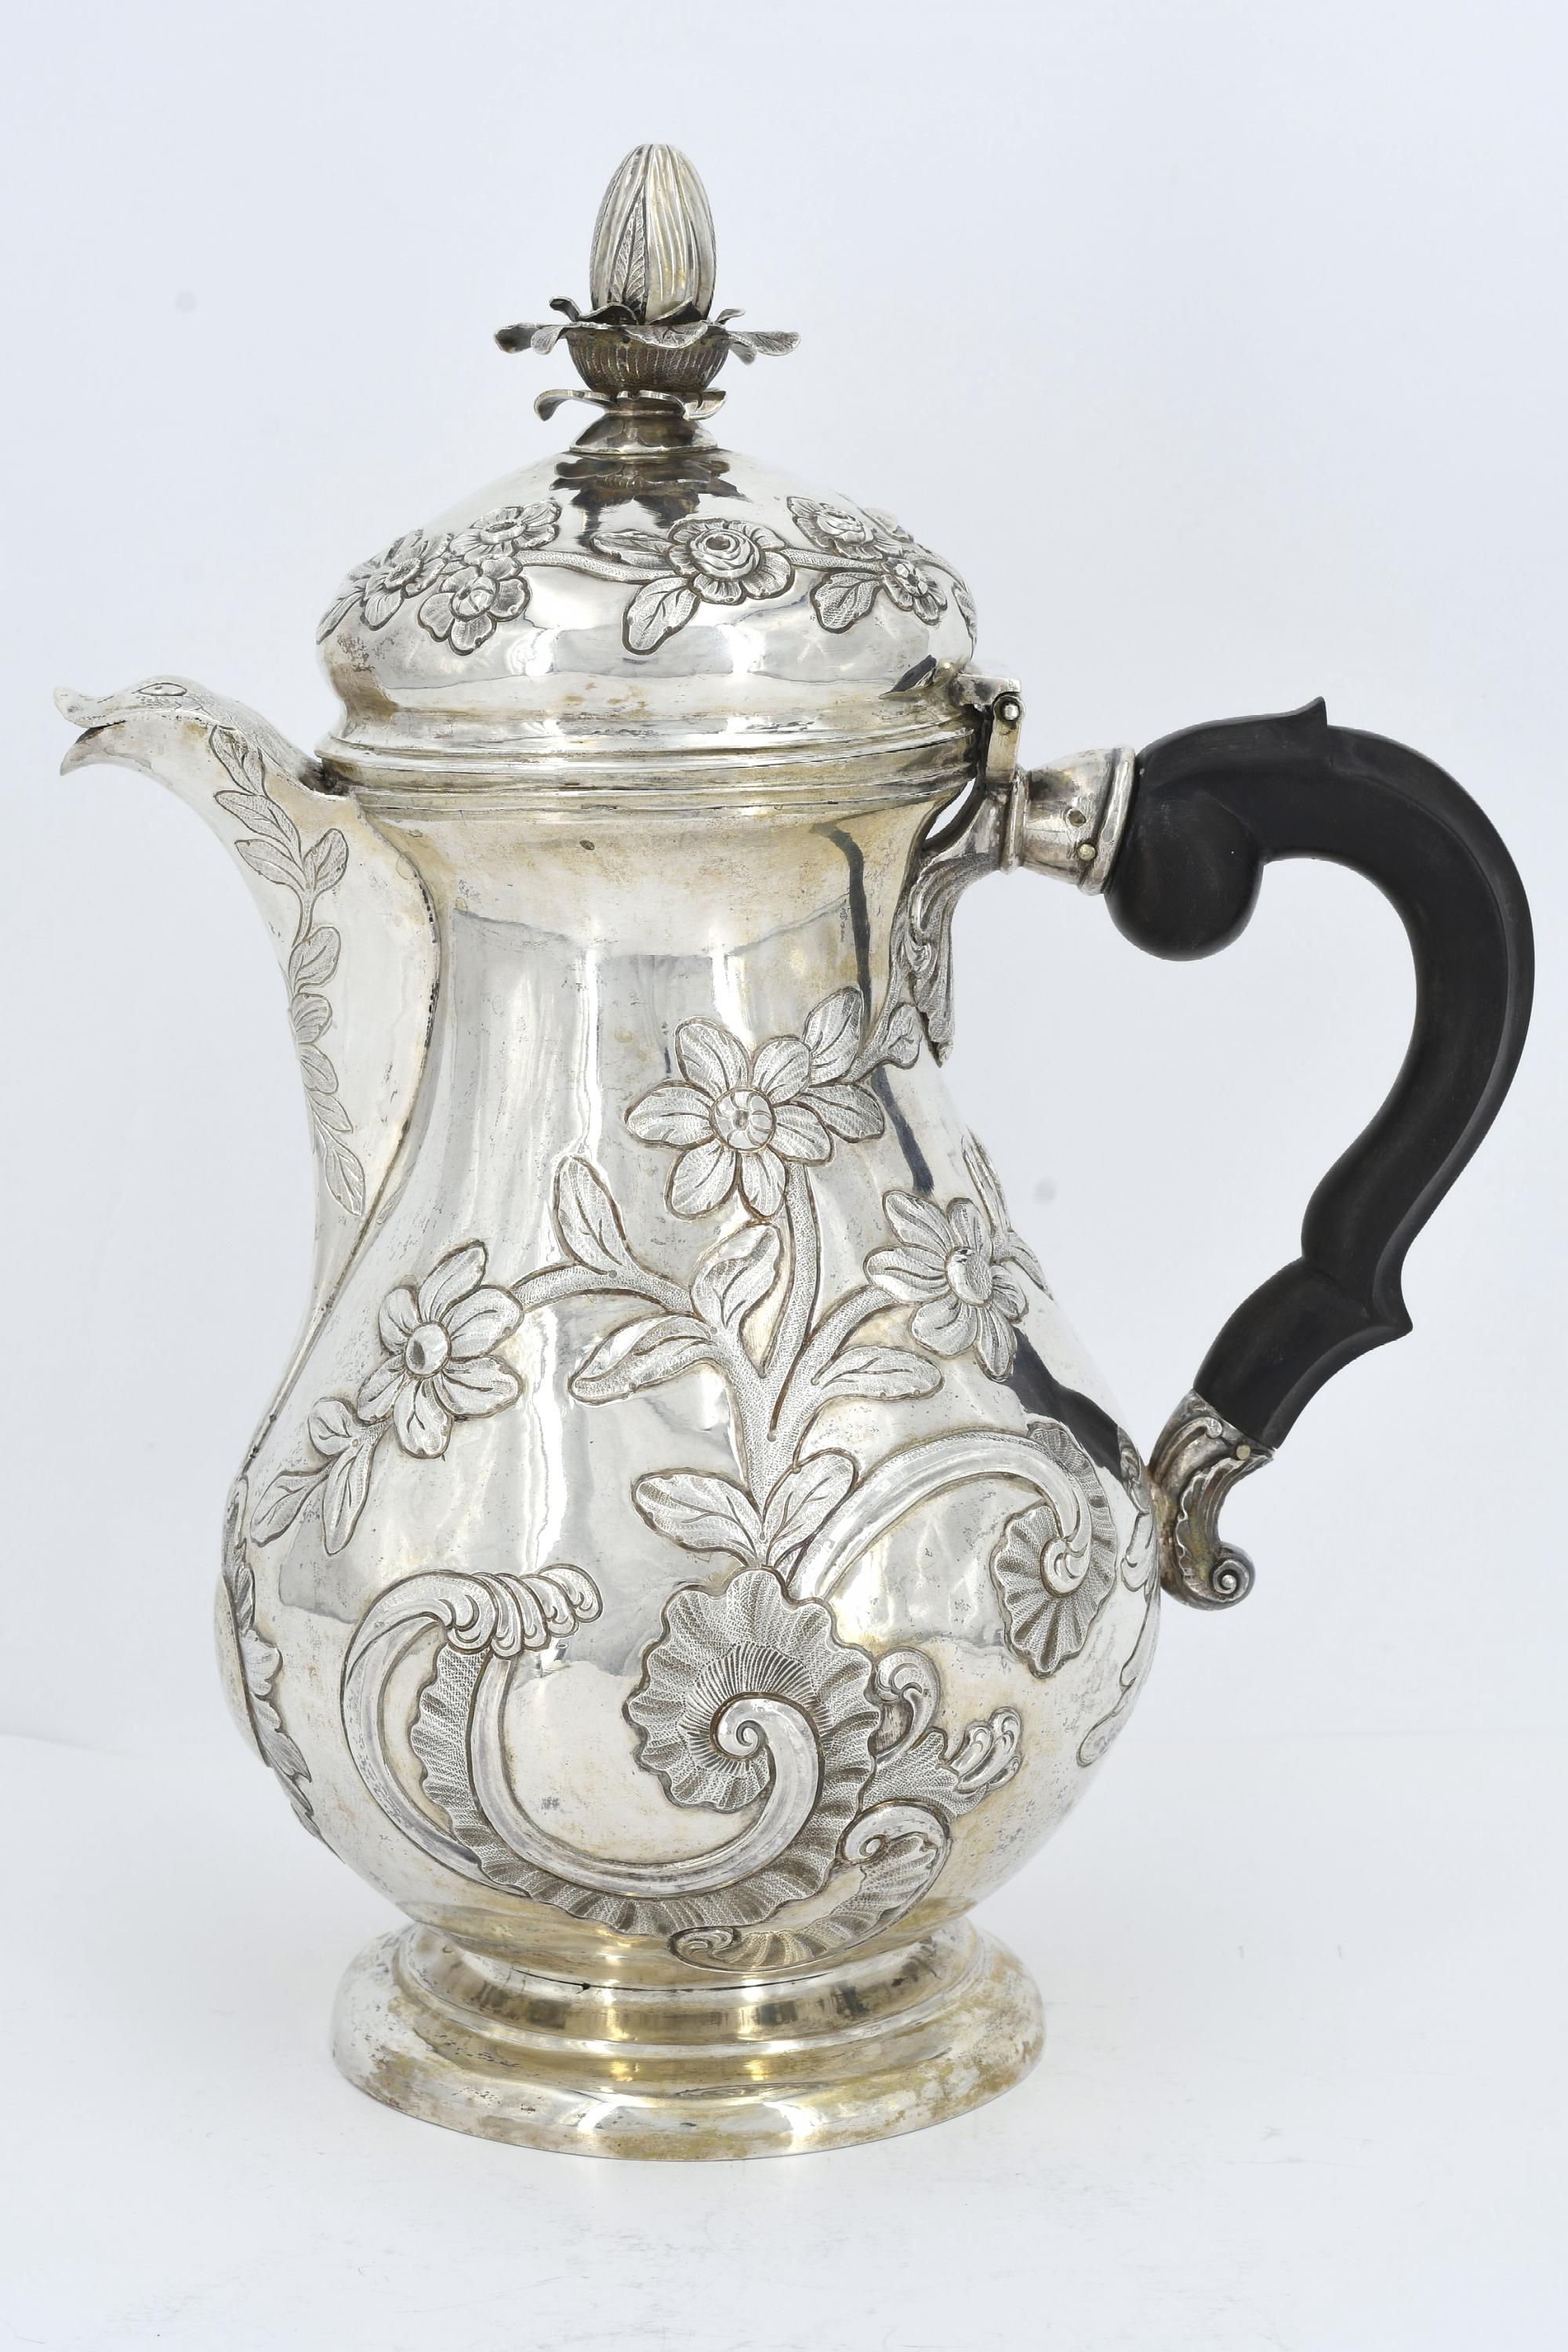 LARGE SILVER PITCHER PRESUMABLY CHRISTENING WATER PITCHER - Image 2 of 7